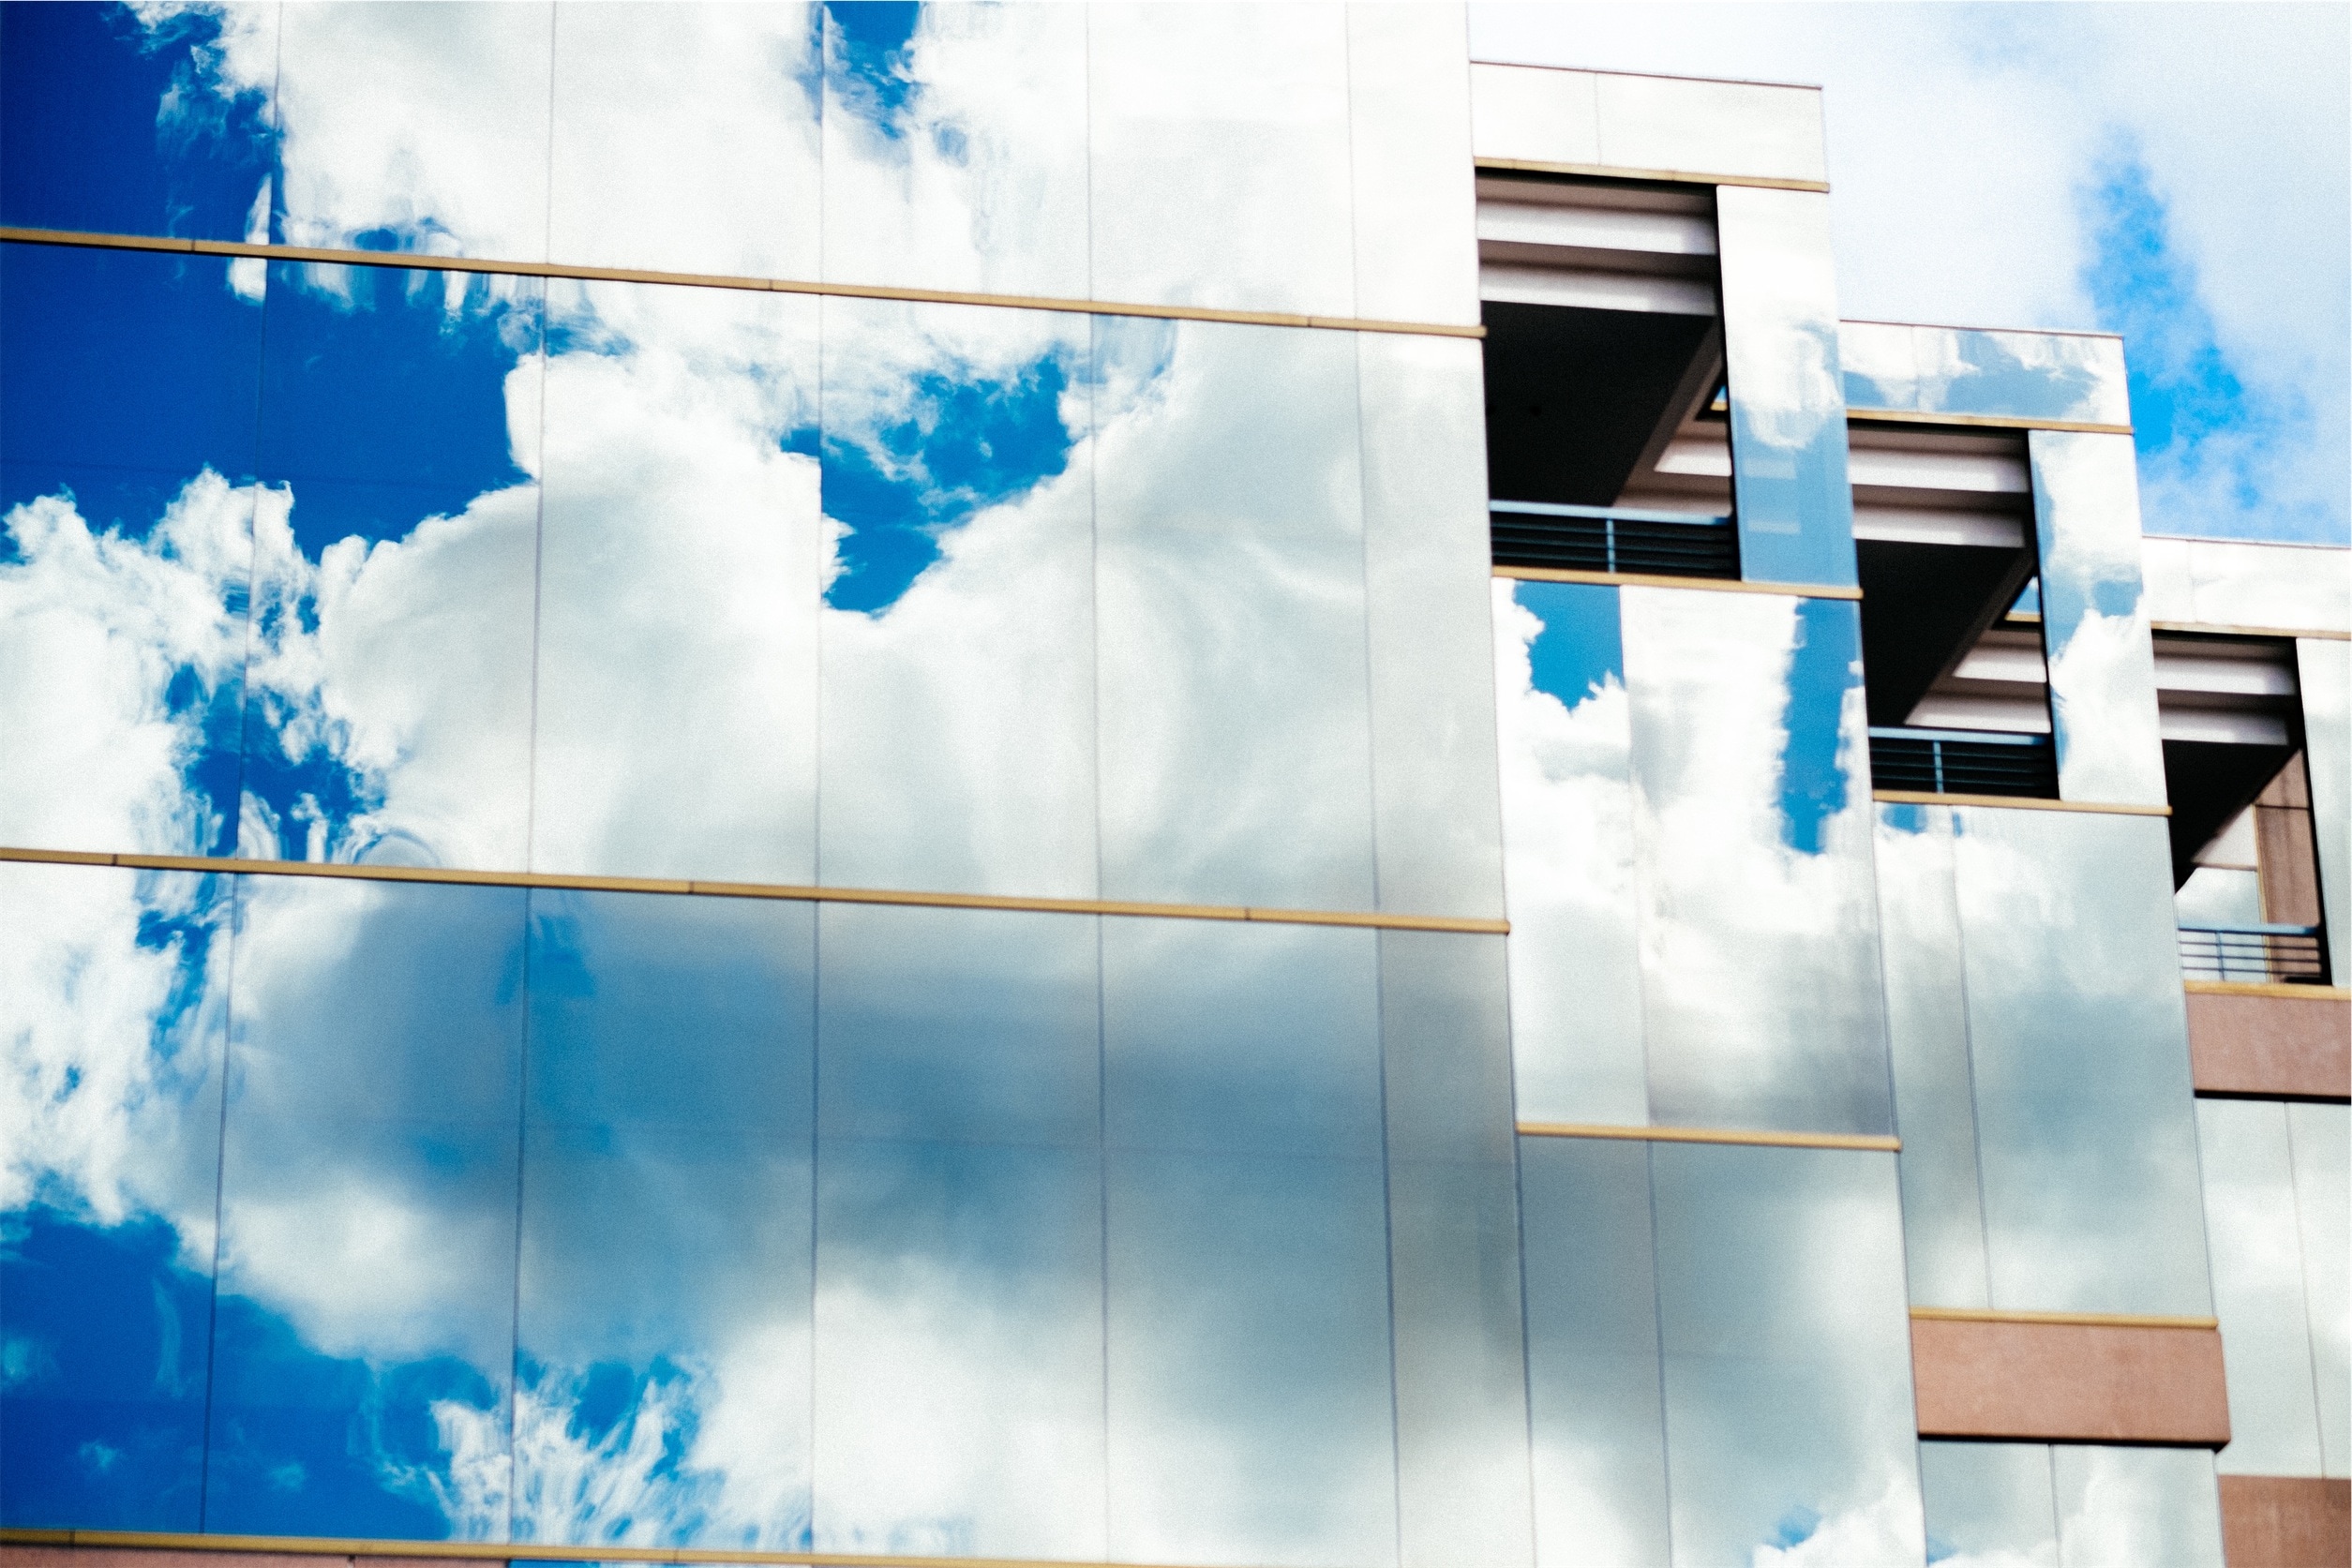 mirrored building blue clouds